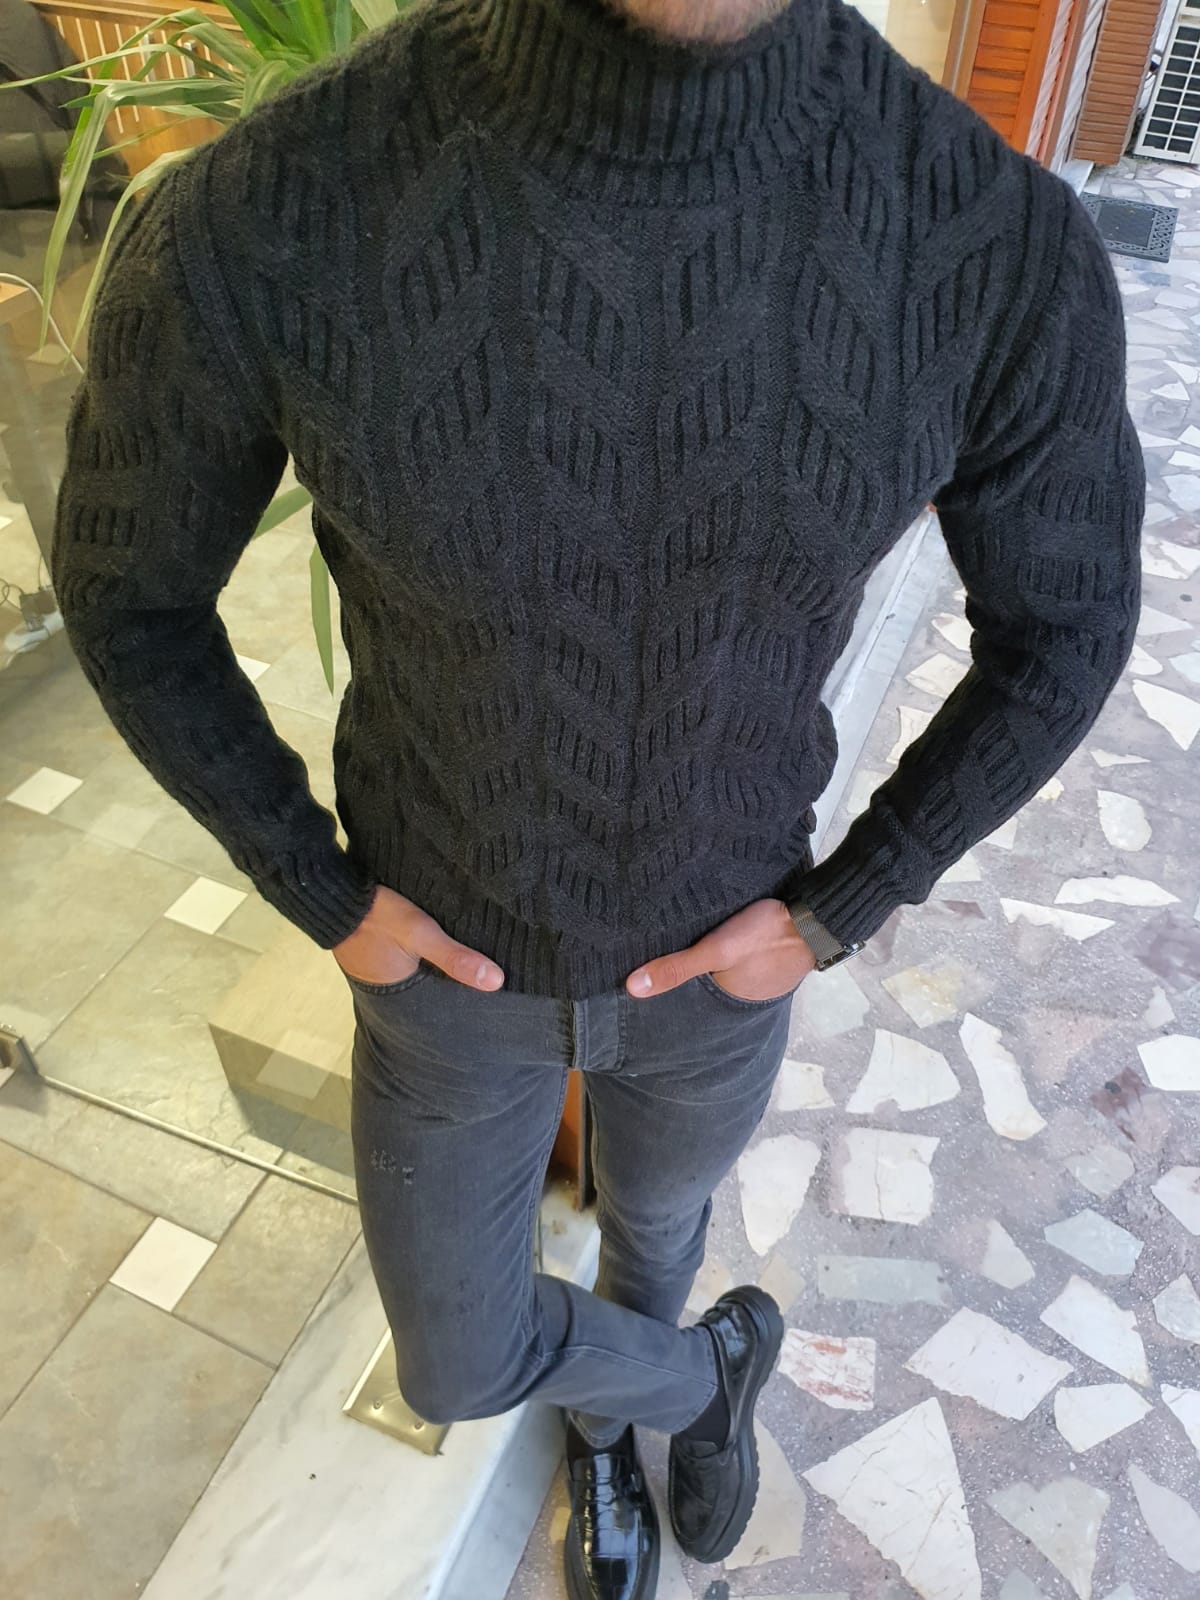 Buy Black Slim Fit Turtleneck Wool Sweater by GentWith | Free Shipping